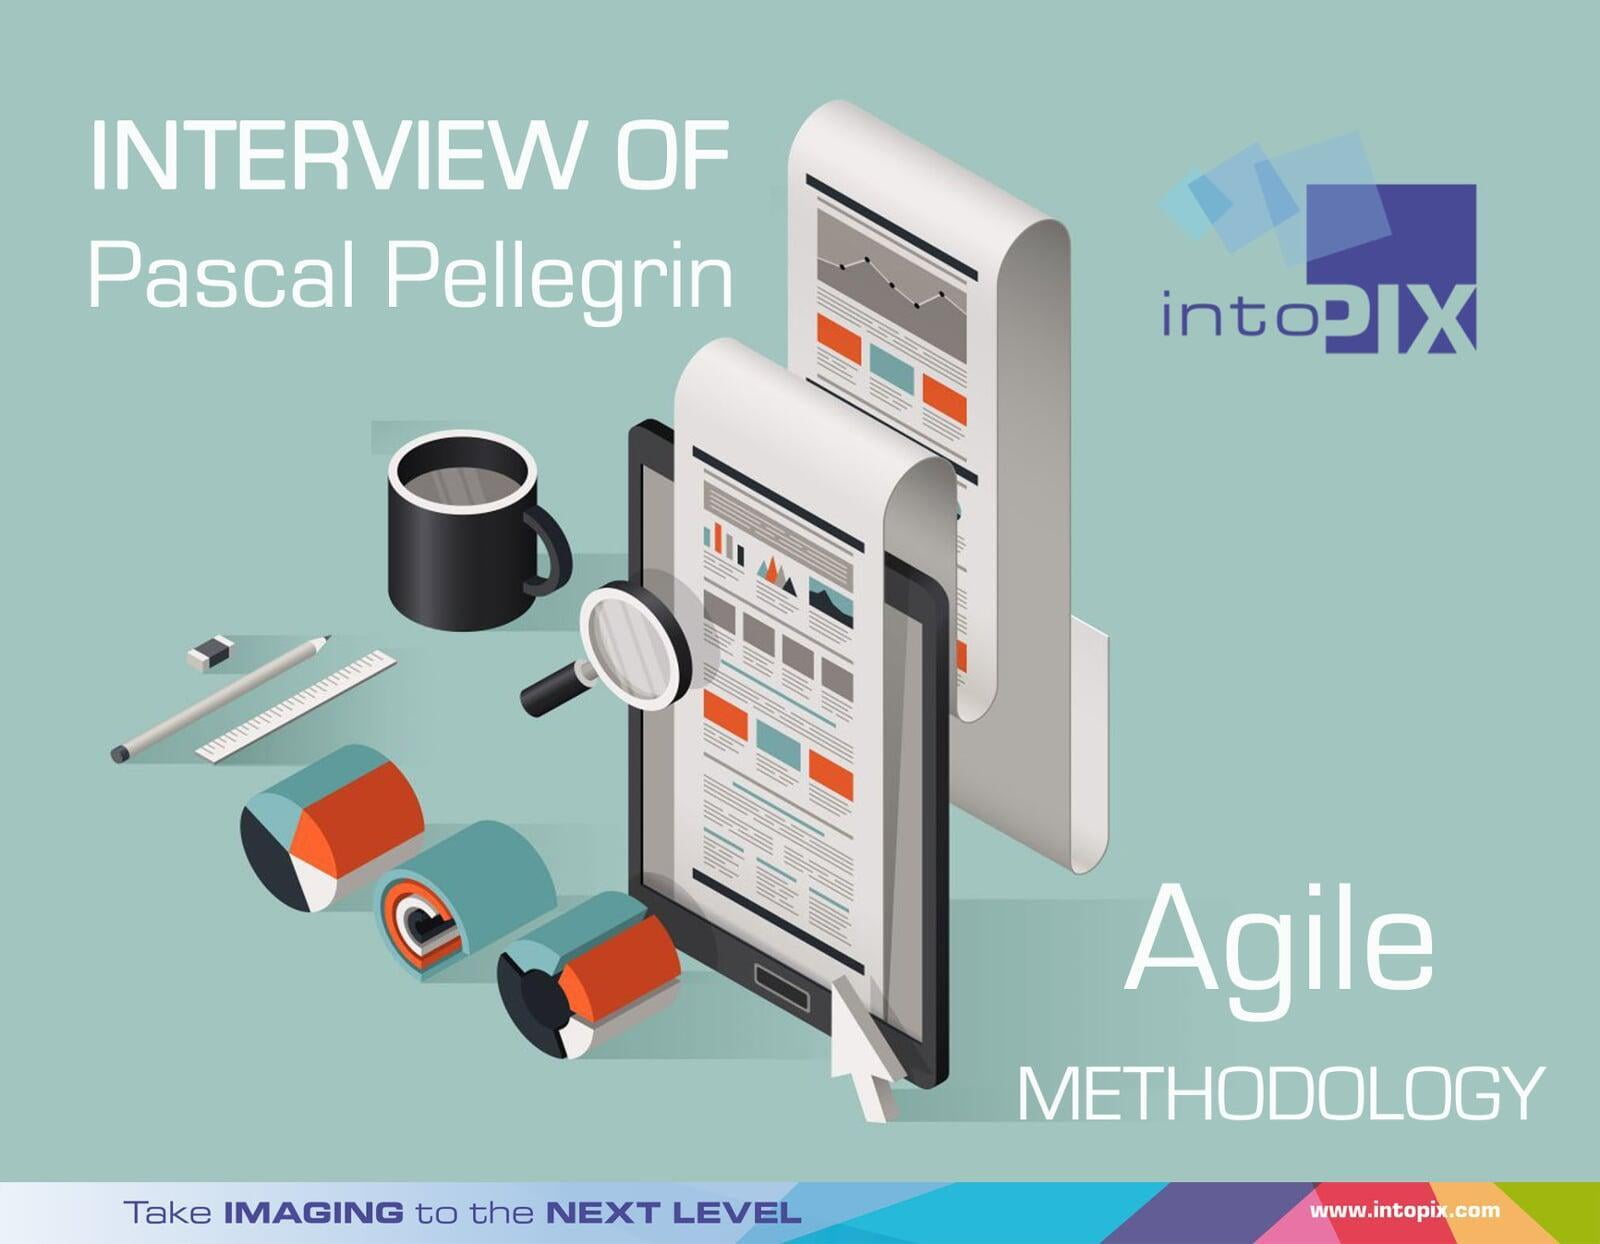 Interview of Pascal Pellegrin: Agile Methodology at intoPIX !